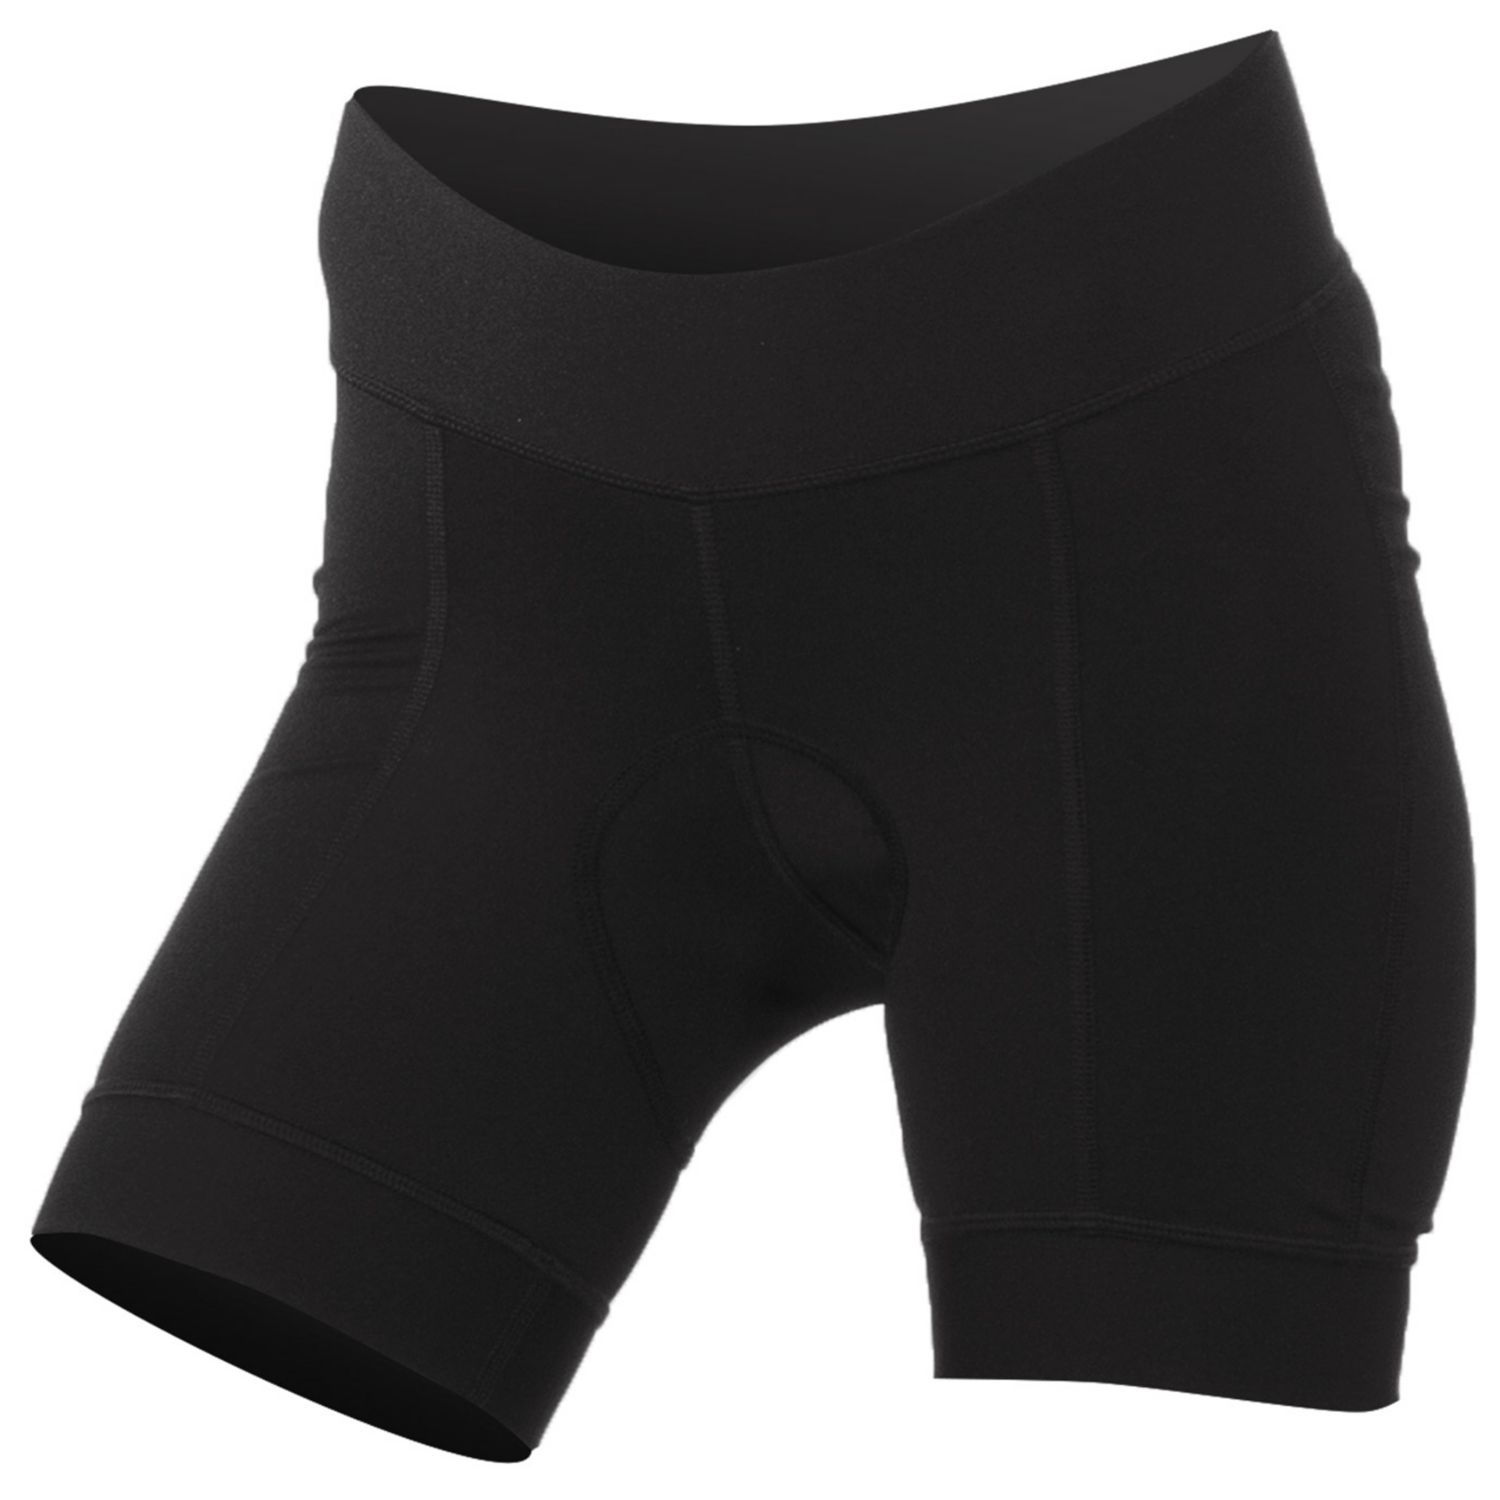 shebeest cycling shorts